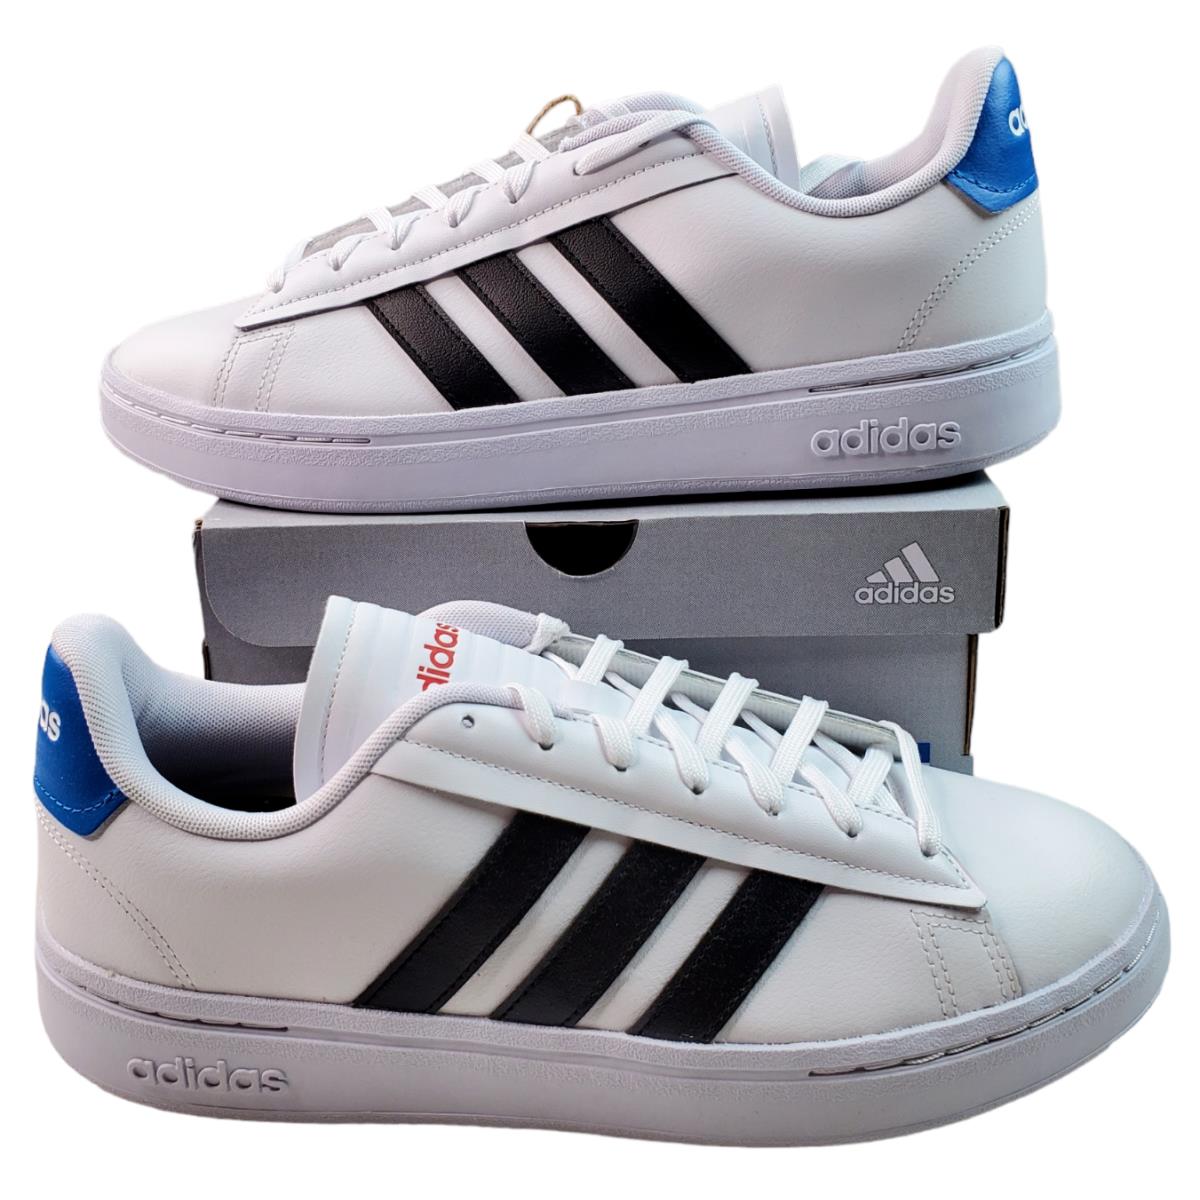 Adidas Men`s Grand Court Alpha Tennis Shoes GY8029 Size 9.5 White